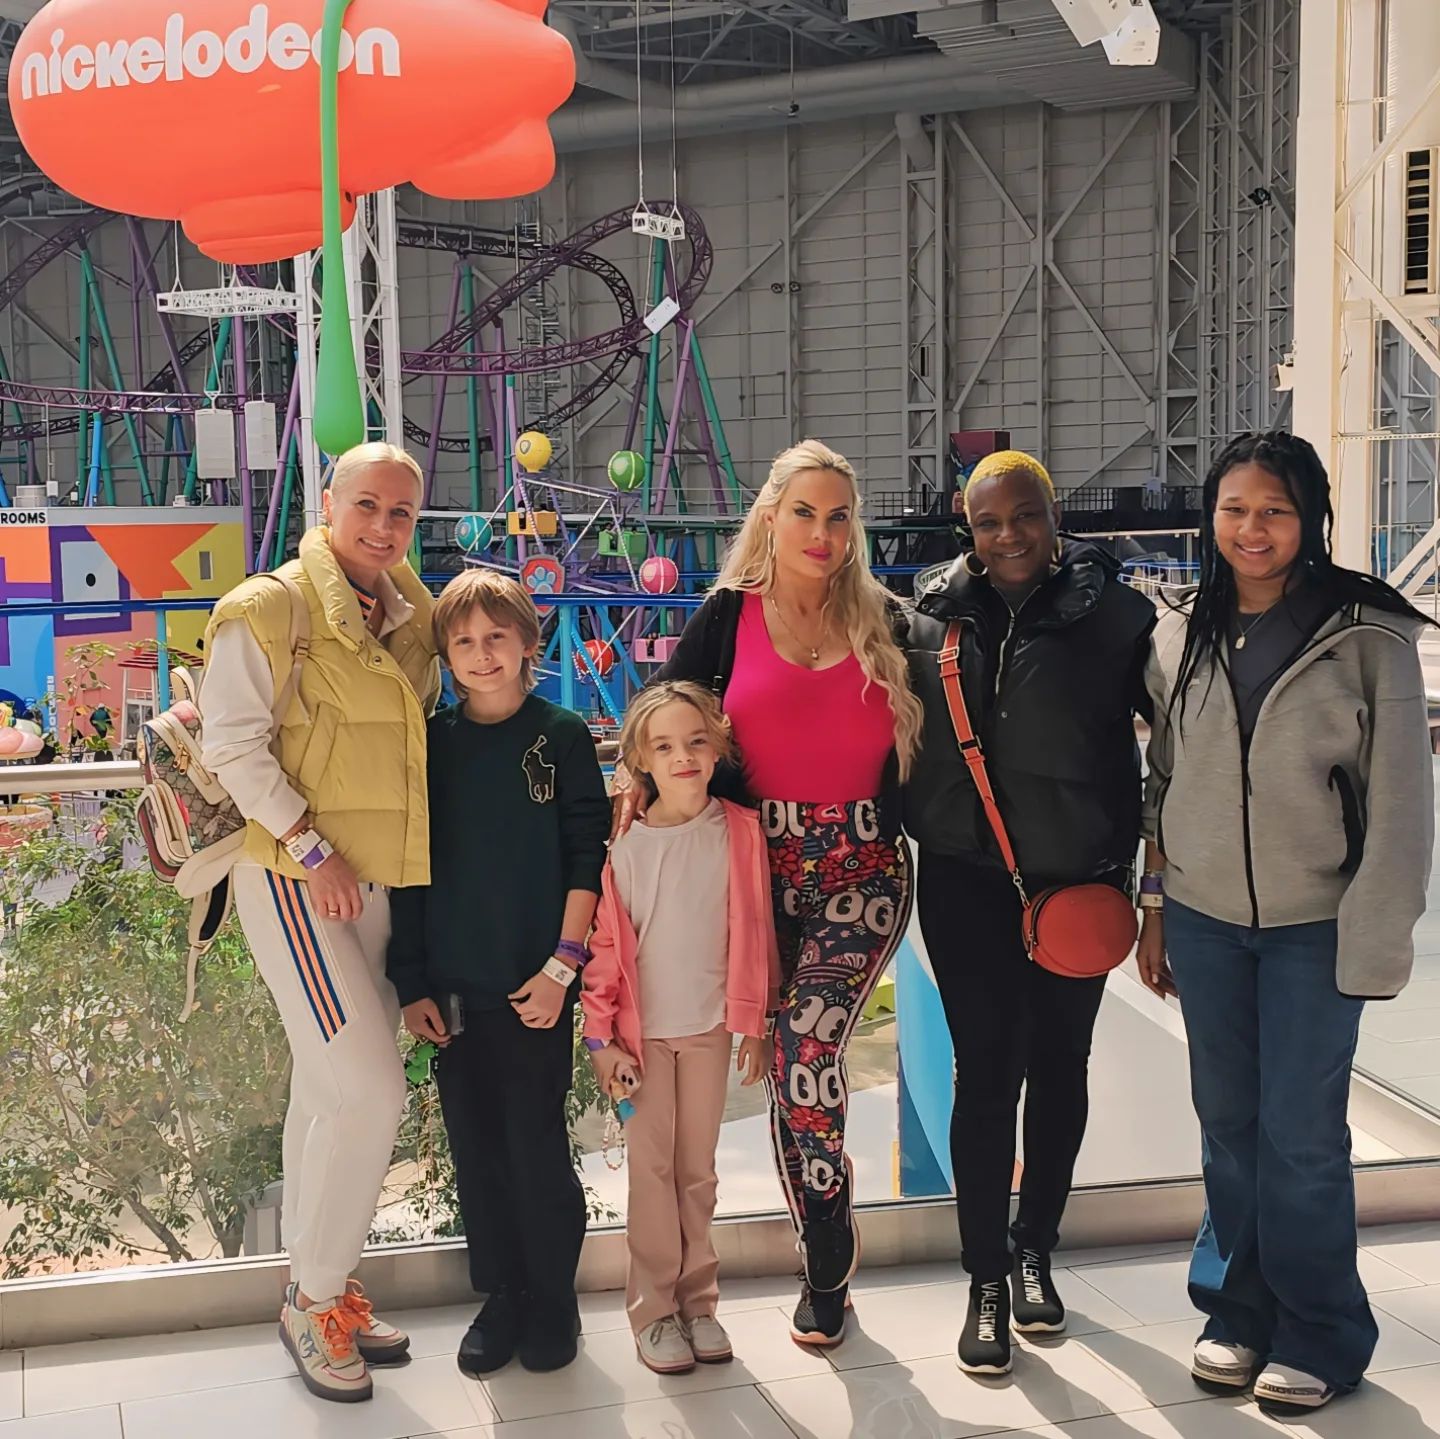 Thank you @americandream #nickelodeanuniversenj for making it a wonderful place to visit! You guys always take care of us and we appreciate it!❤️Chanel, friends  and I always have a blast!!
#springbreak #themepark